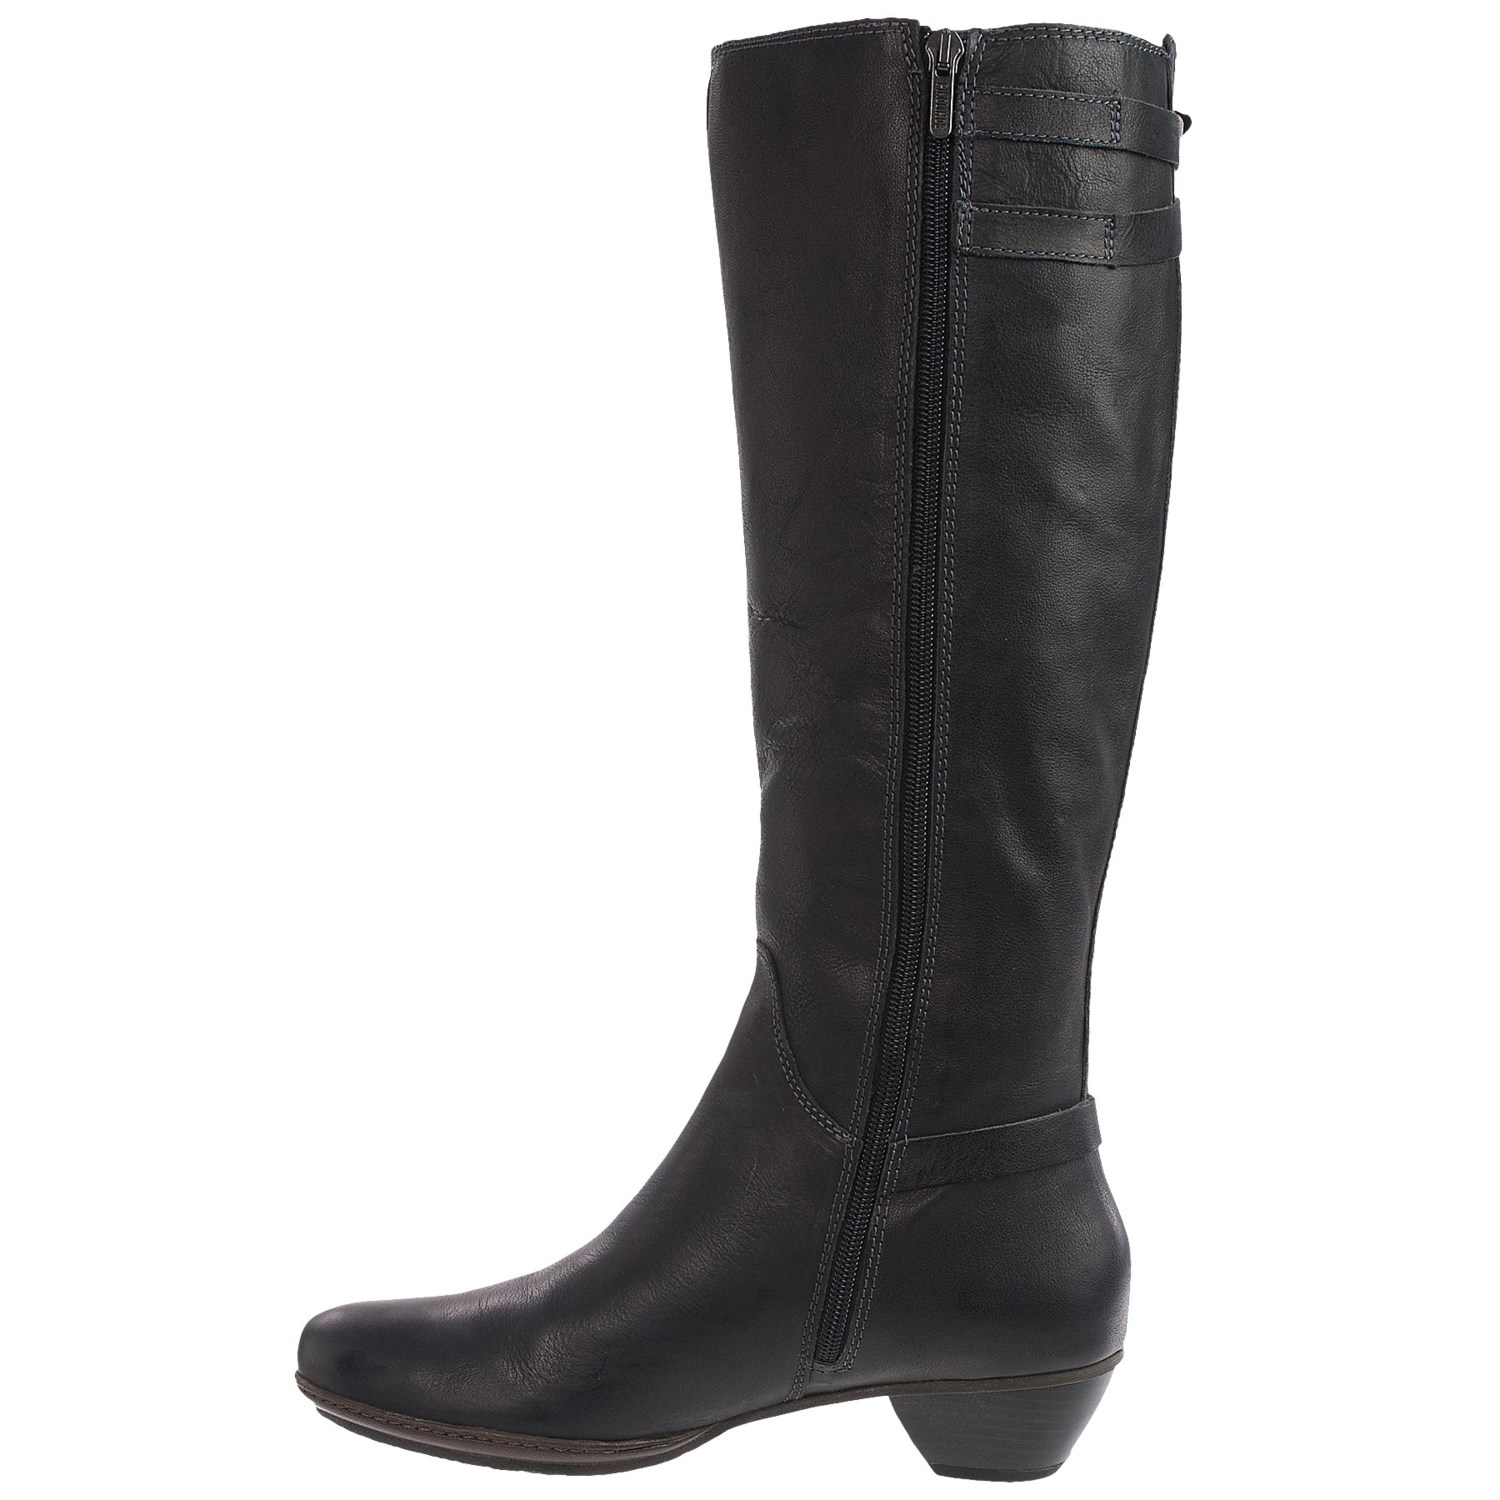 Pikolinos Brujas Tall Leather Boots (For Women) 9063W - Save 39%